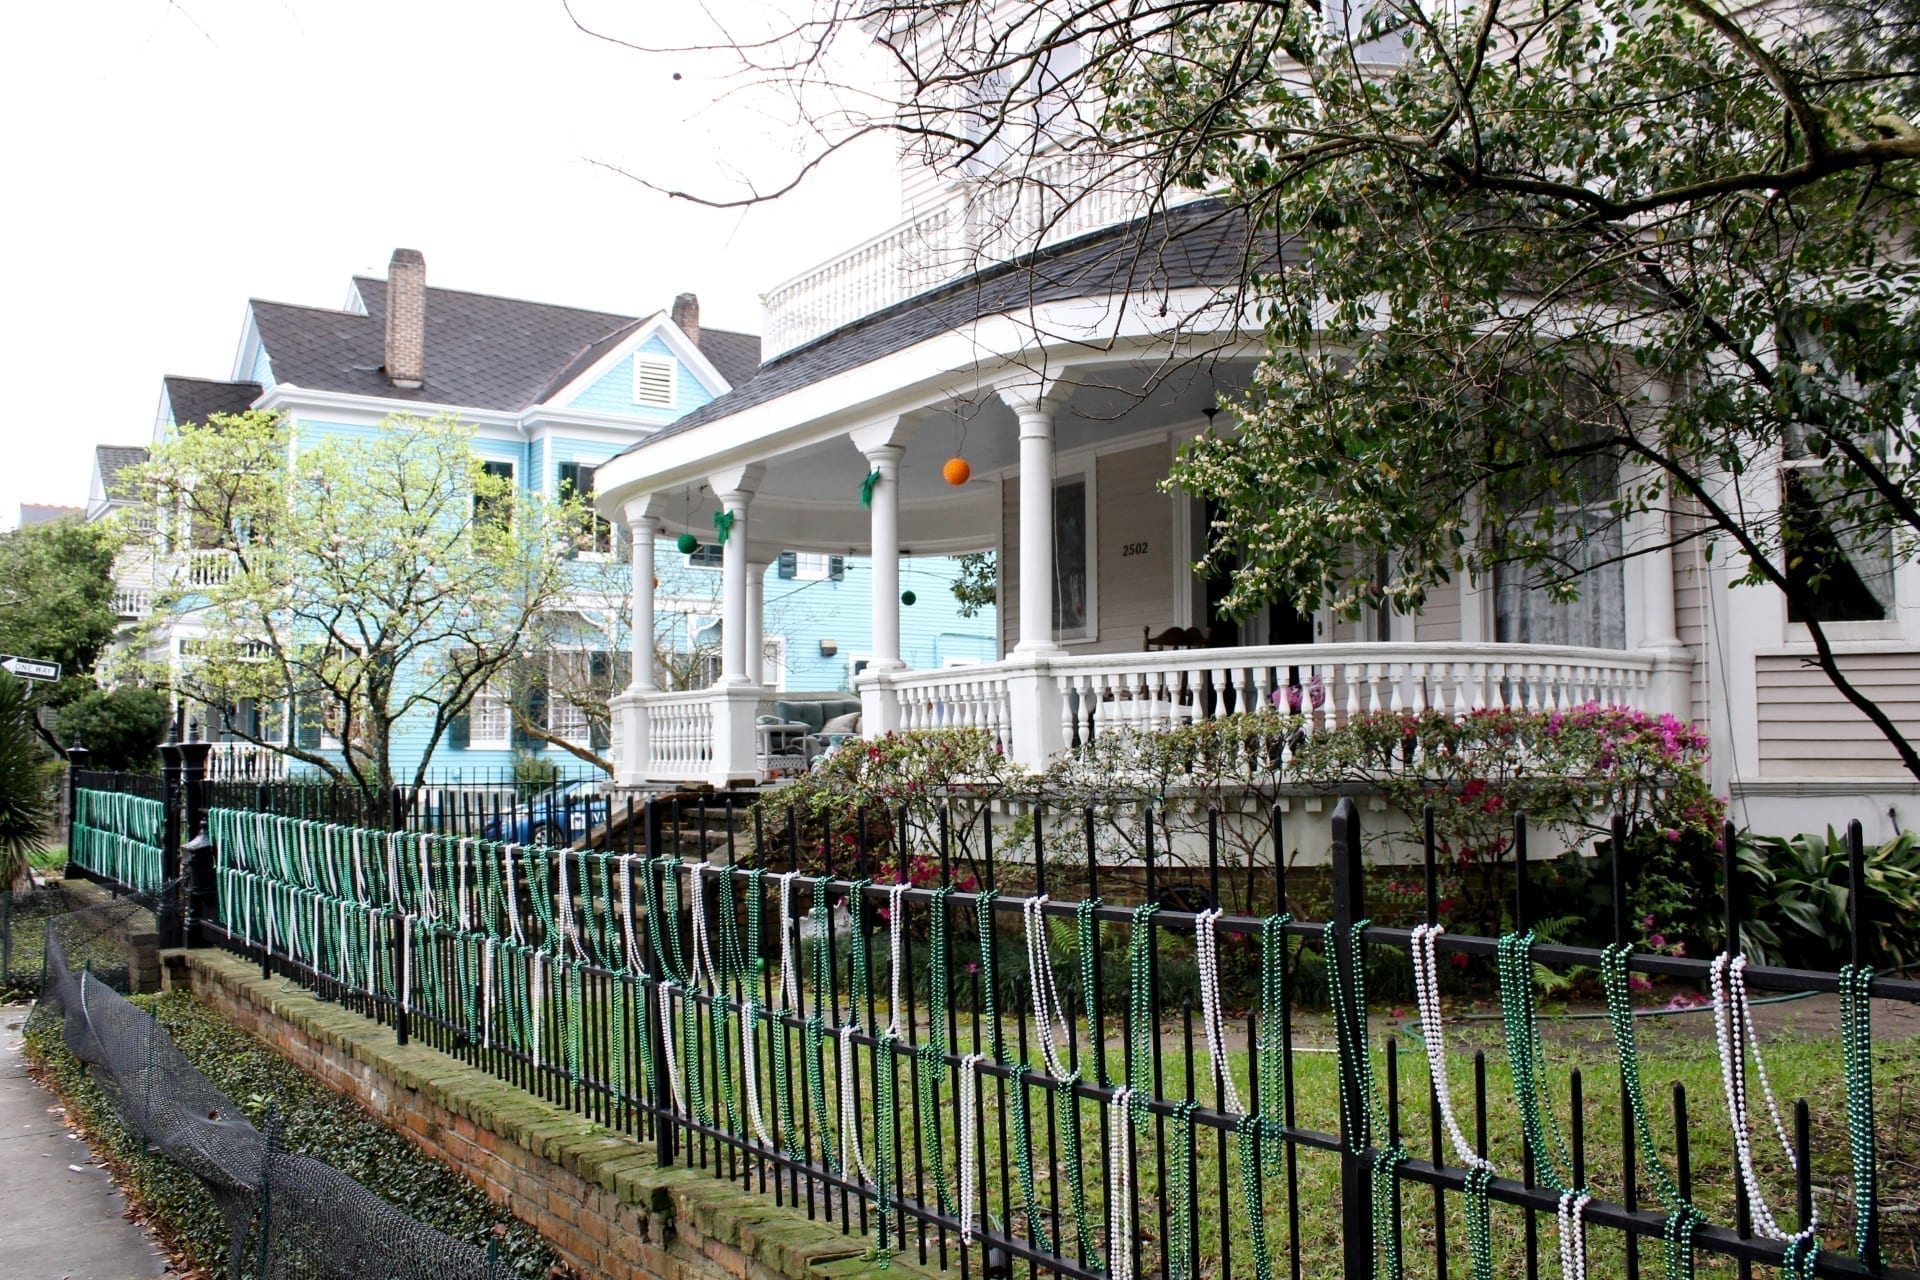 Near the offices of our New Orleans SEO Company, a Louisiana House with Mardi Gras Beads sits in the Garden District